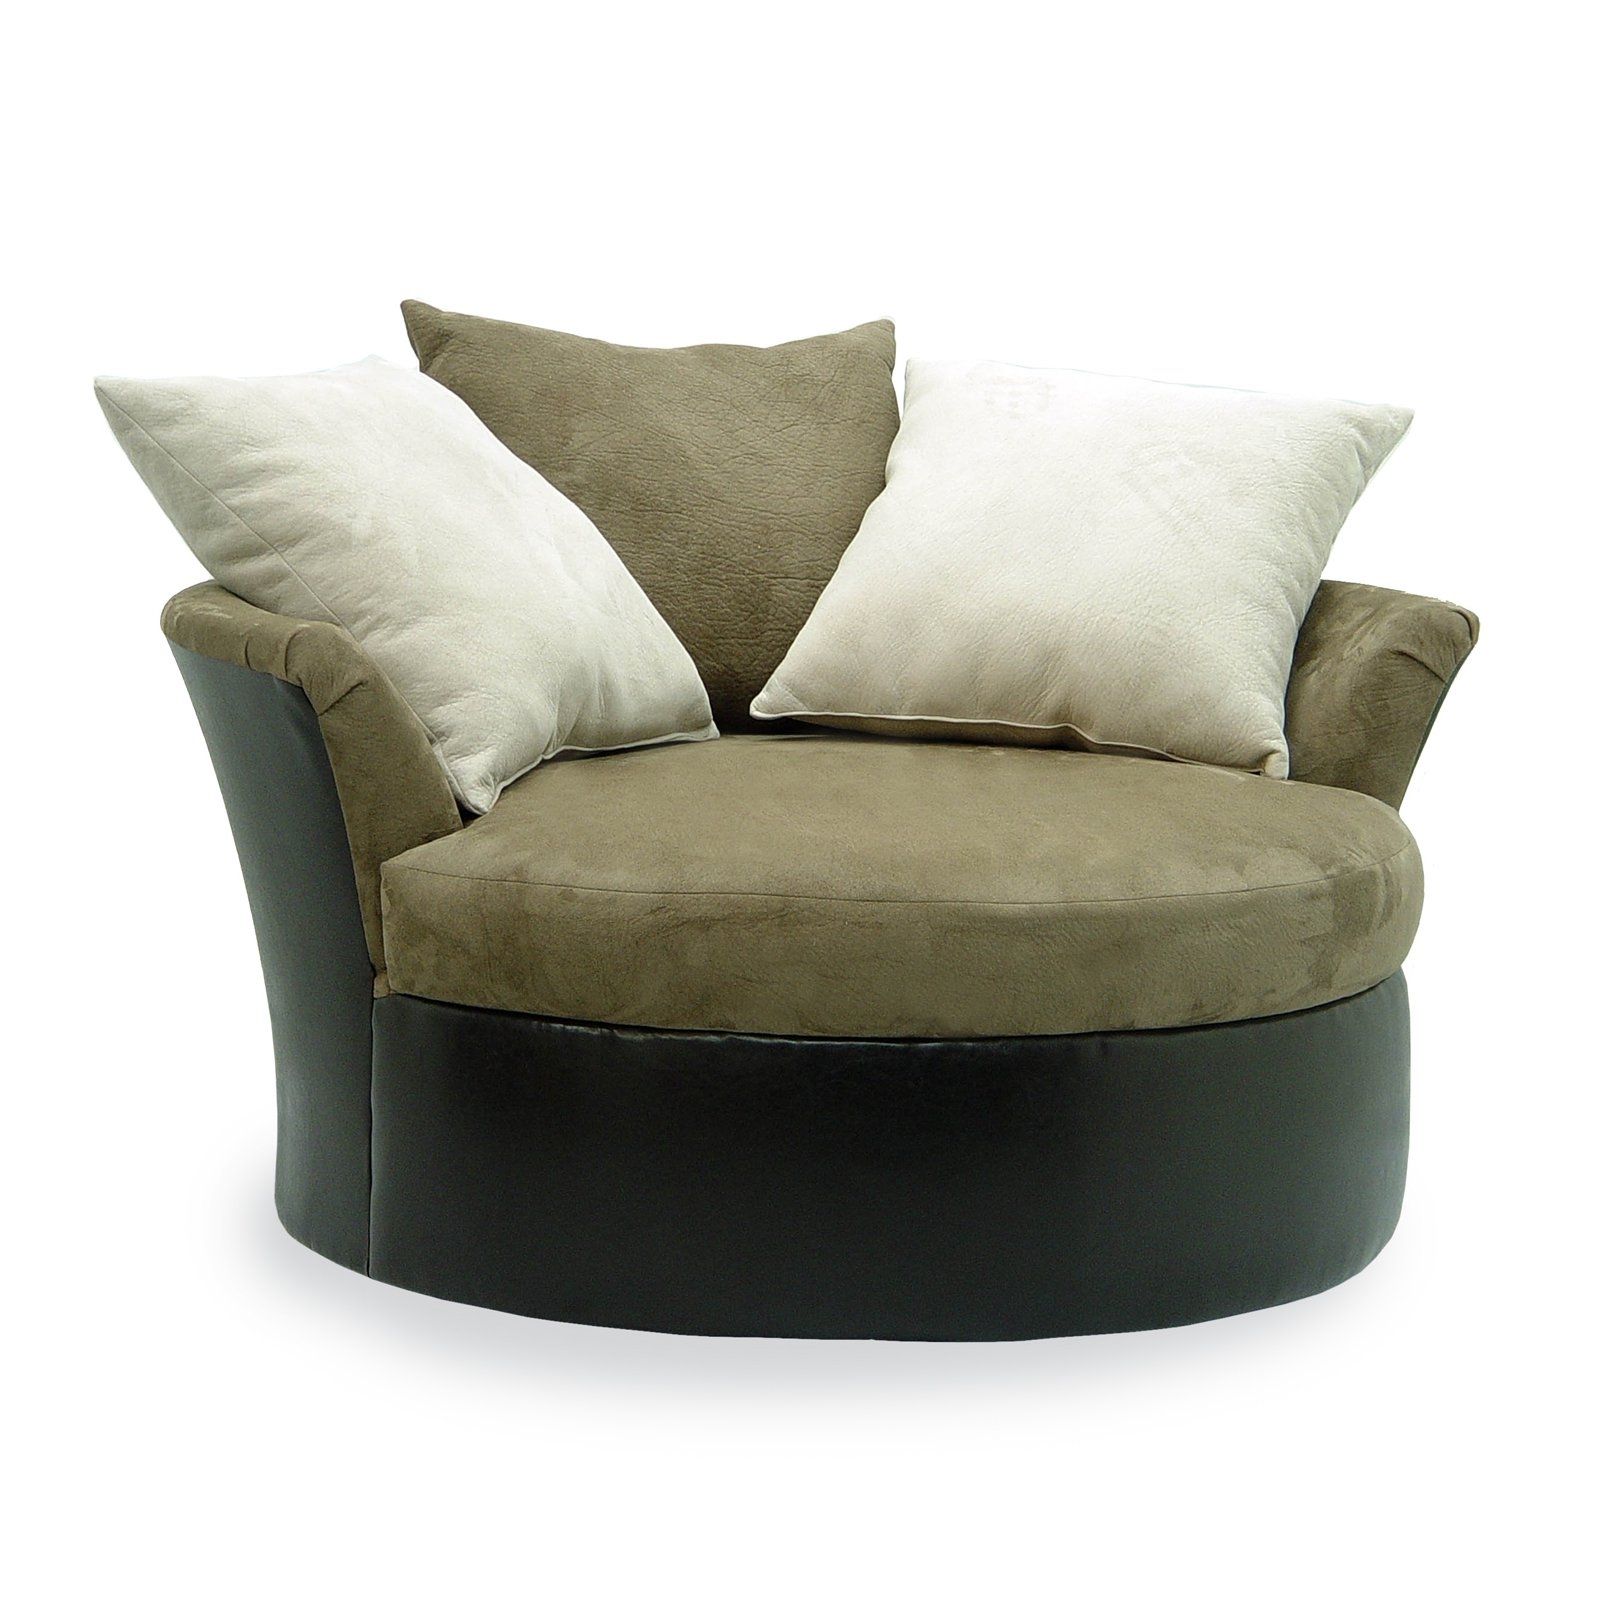 Outstanding Round Chaise Lounge Designs – Decofurnish Pertaining To Best And Newest Round Chaises (Photo 1 of 15)